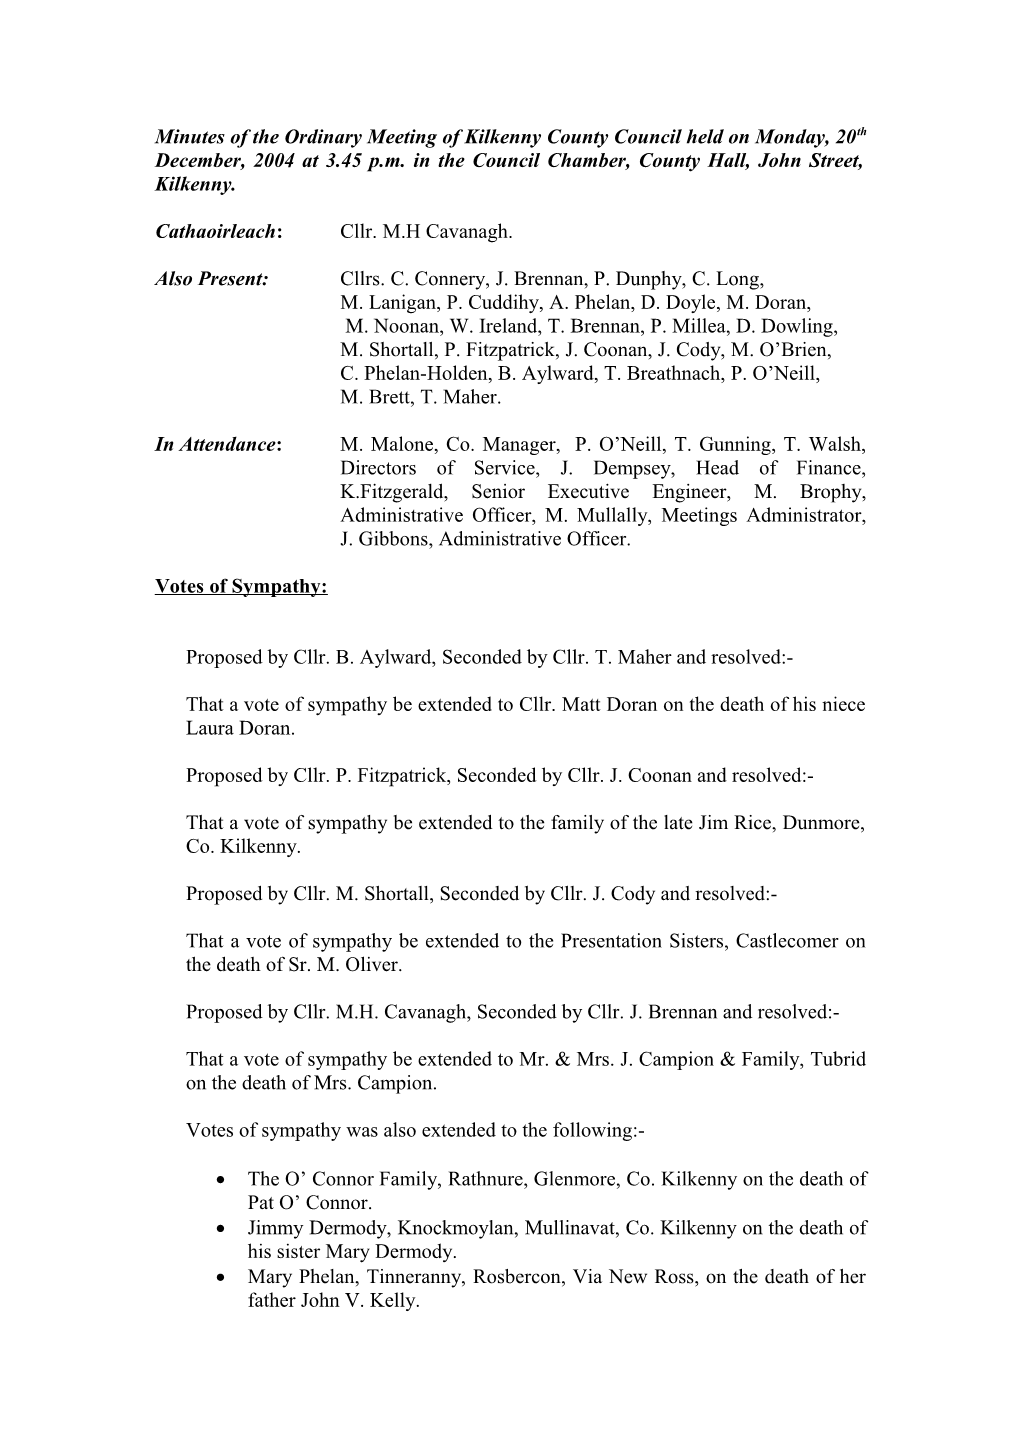 Minutes of the Ordinary Meeting of Kilkenny County Council Held on Monday, 20Th December